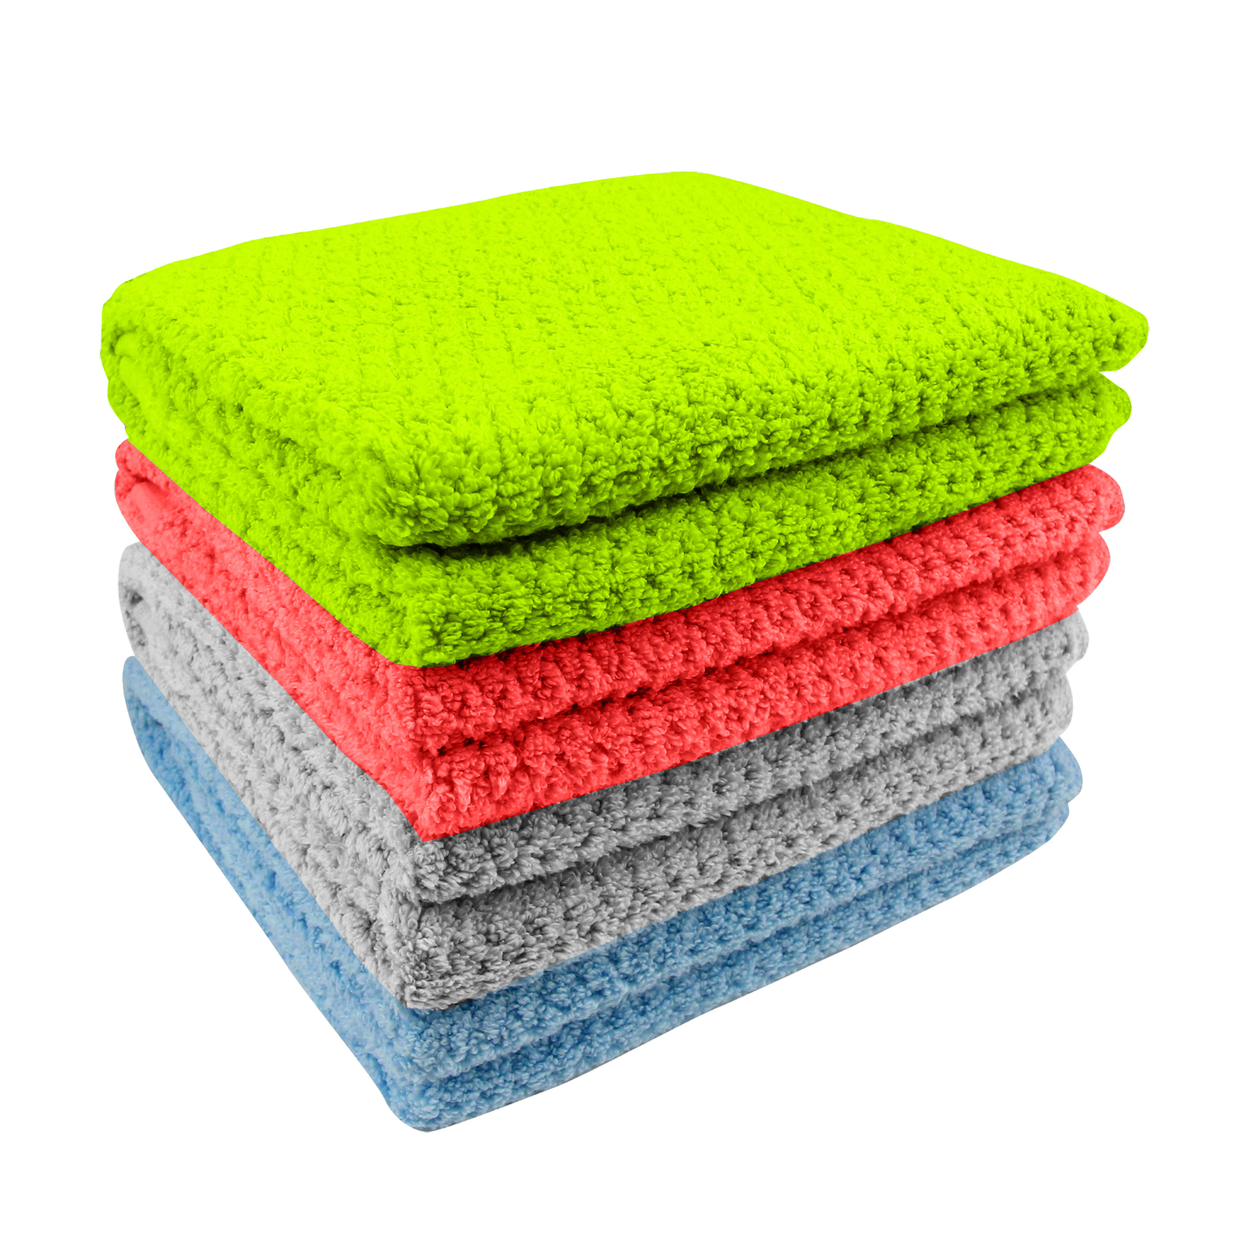 3-Pack: Ultra-Soft Popcorn Textured Weaved 100% Cotton Quick Dry Absorbent Bath Spa Towels